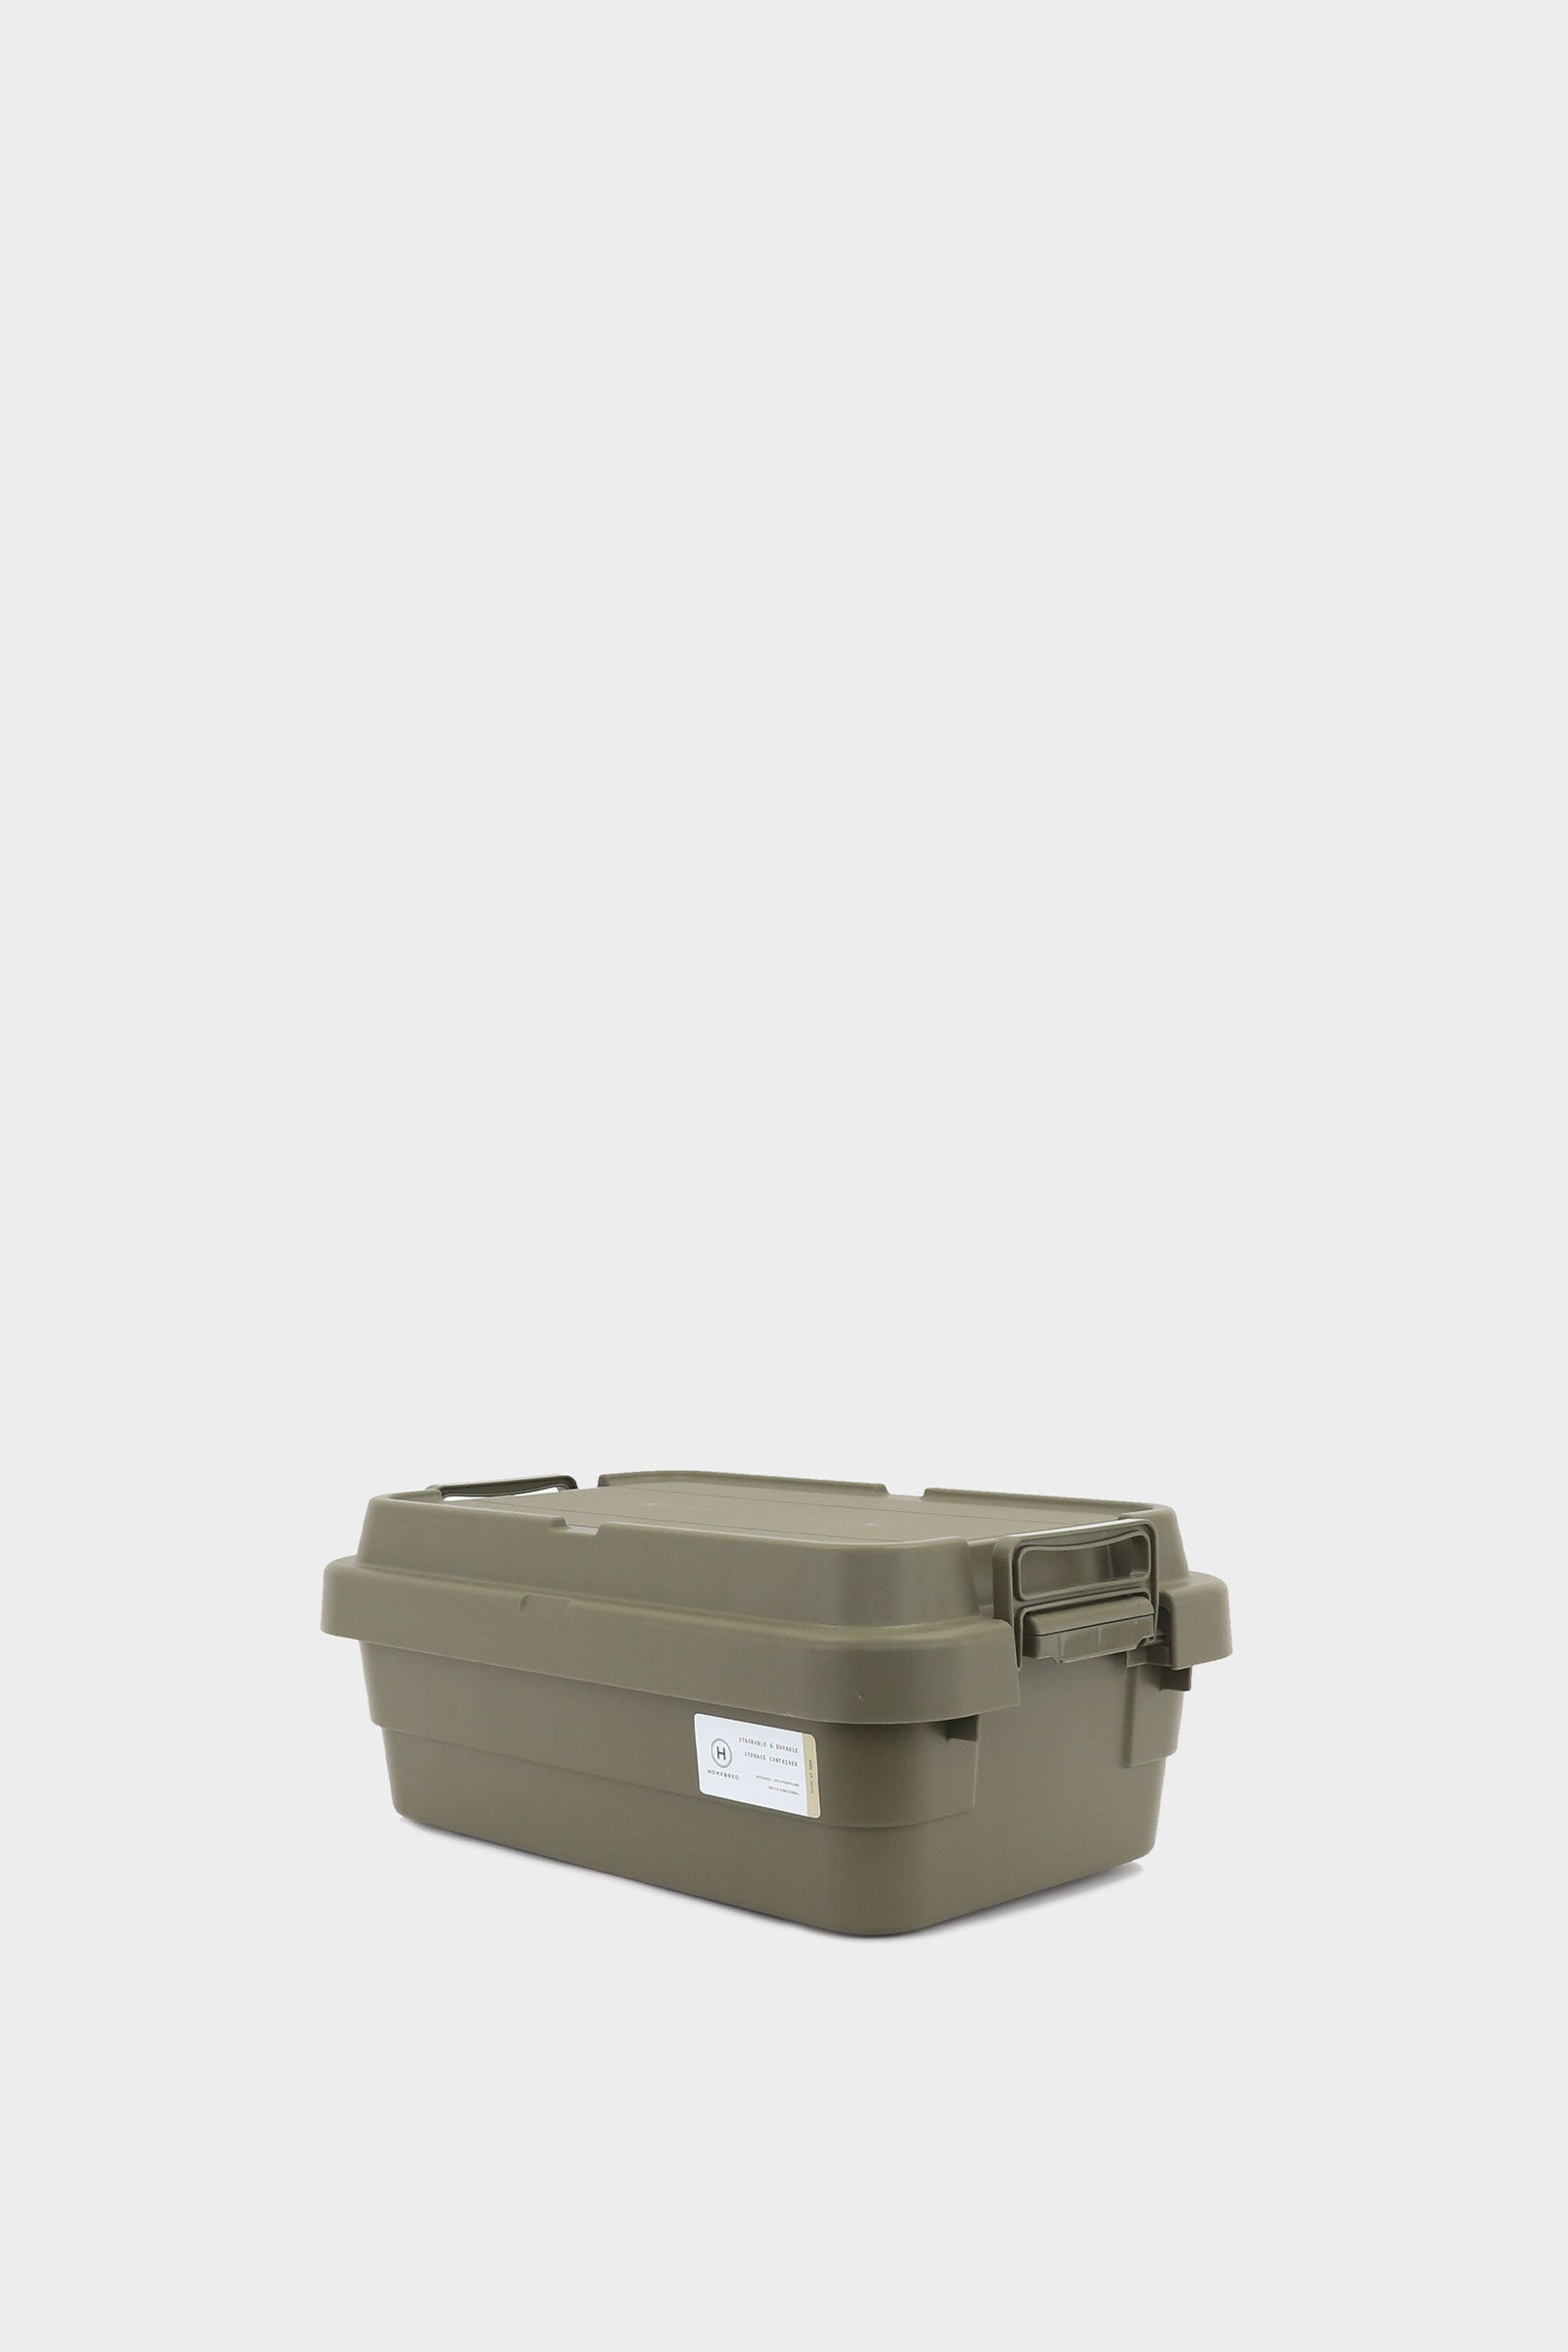 8 Gallon Shallow Container